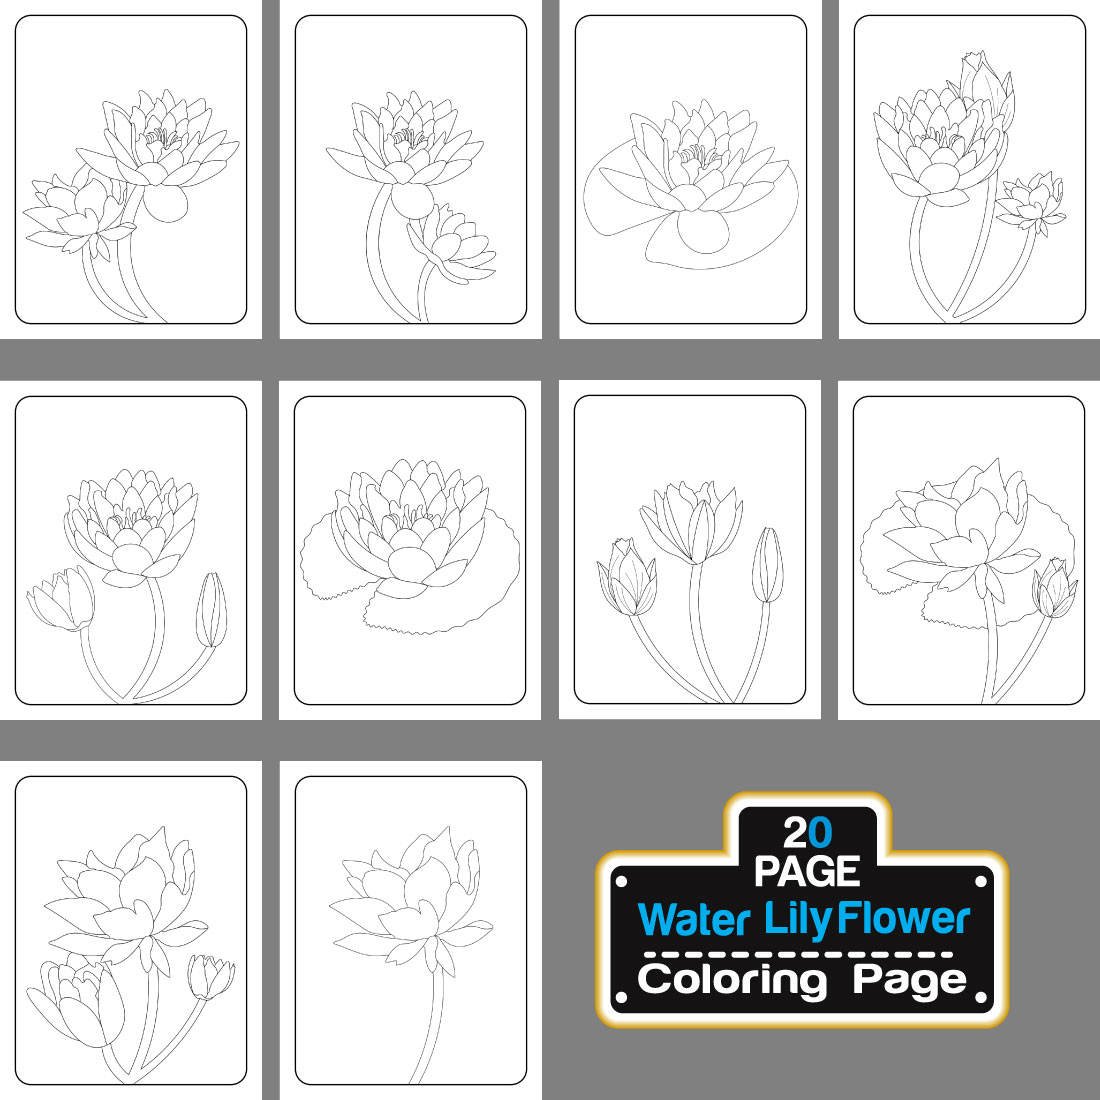 Lotus flower coloring page hand drawing line art vector illustration